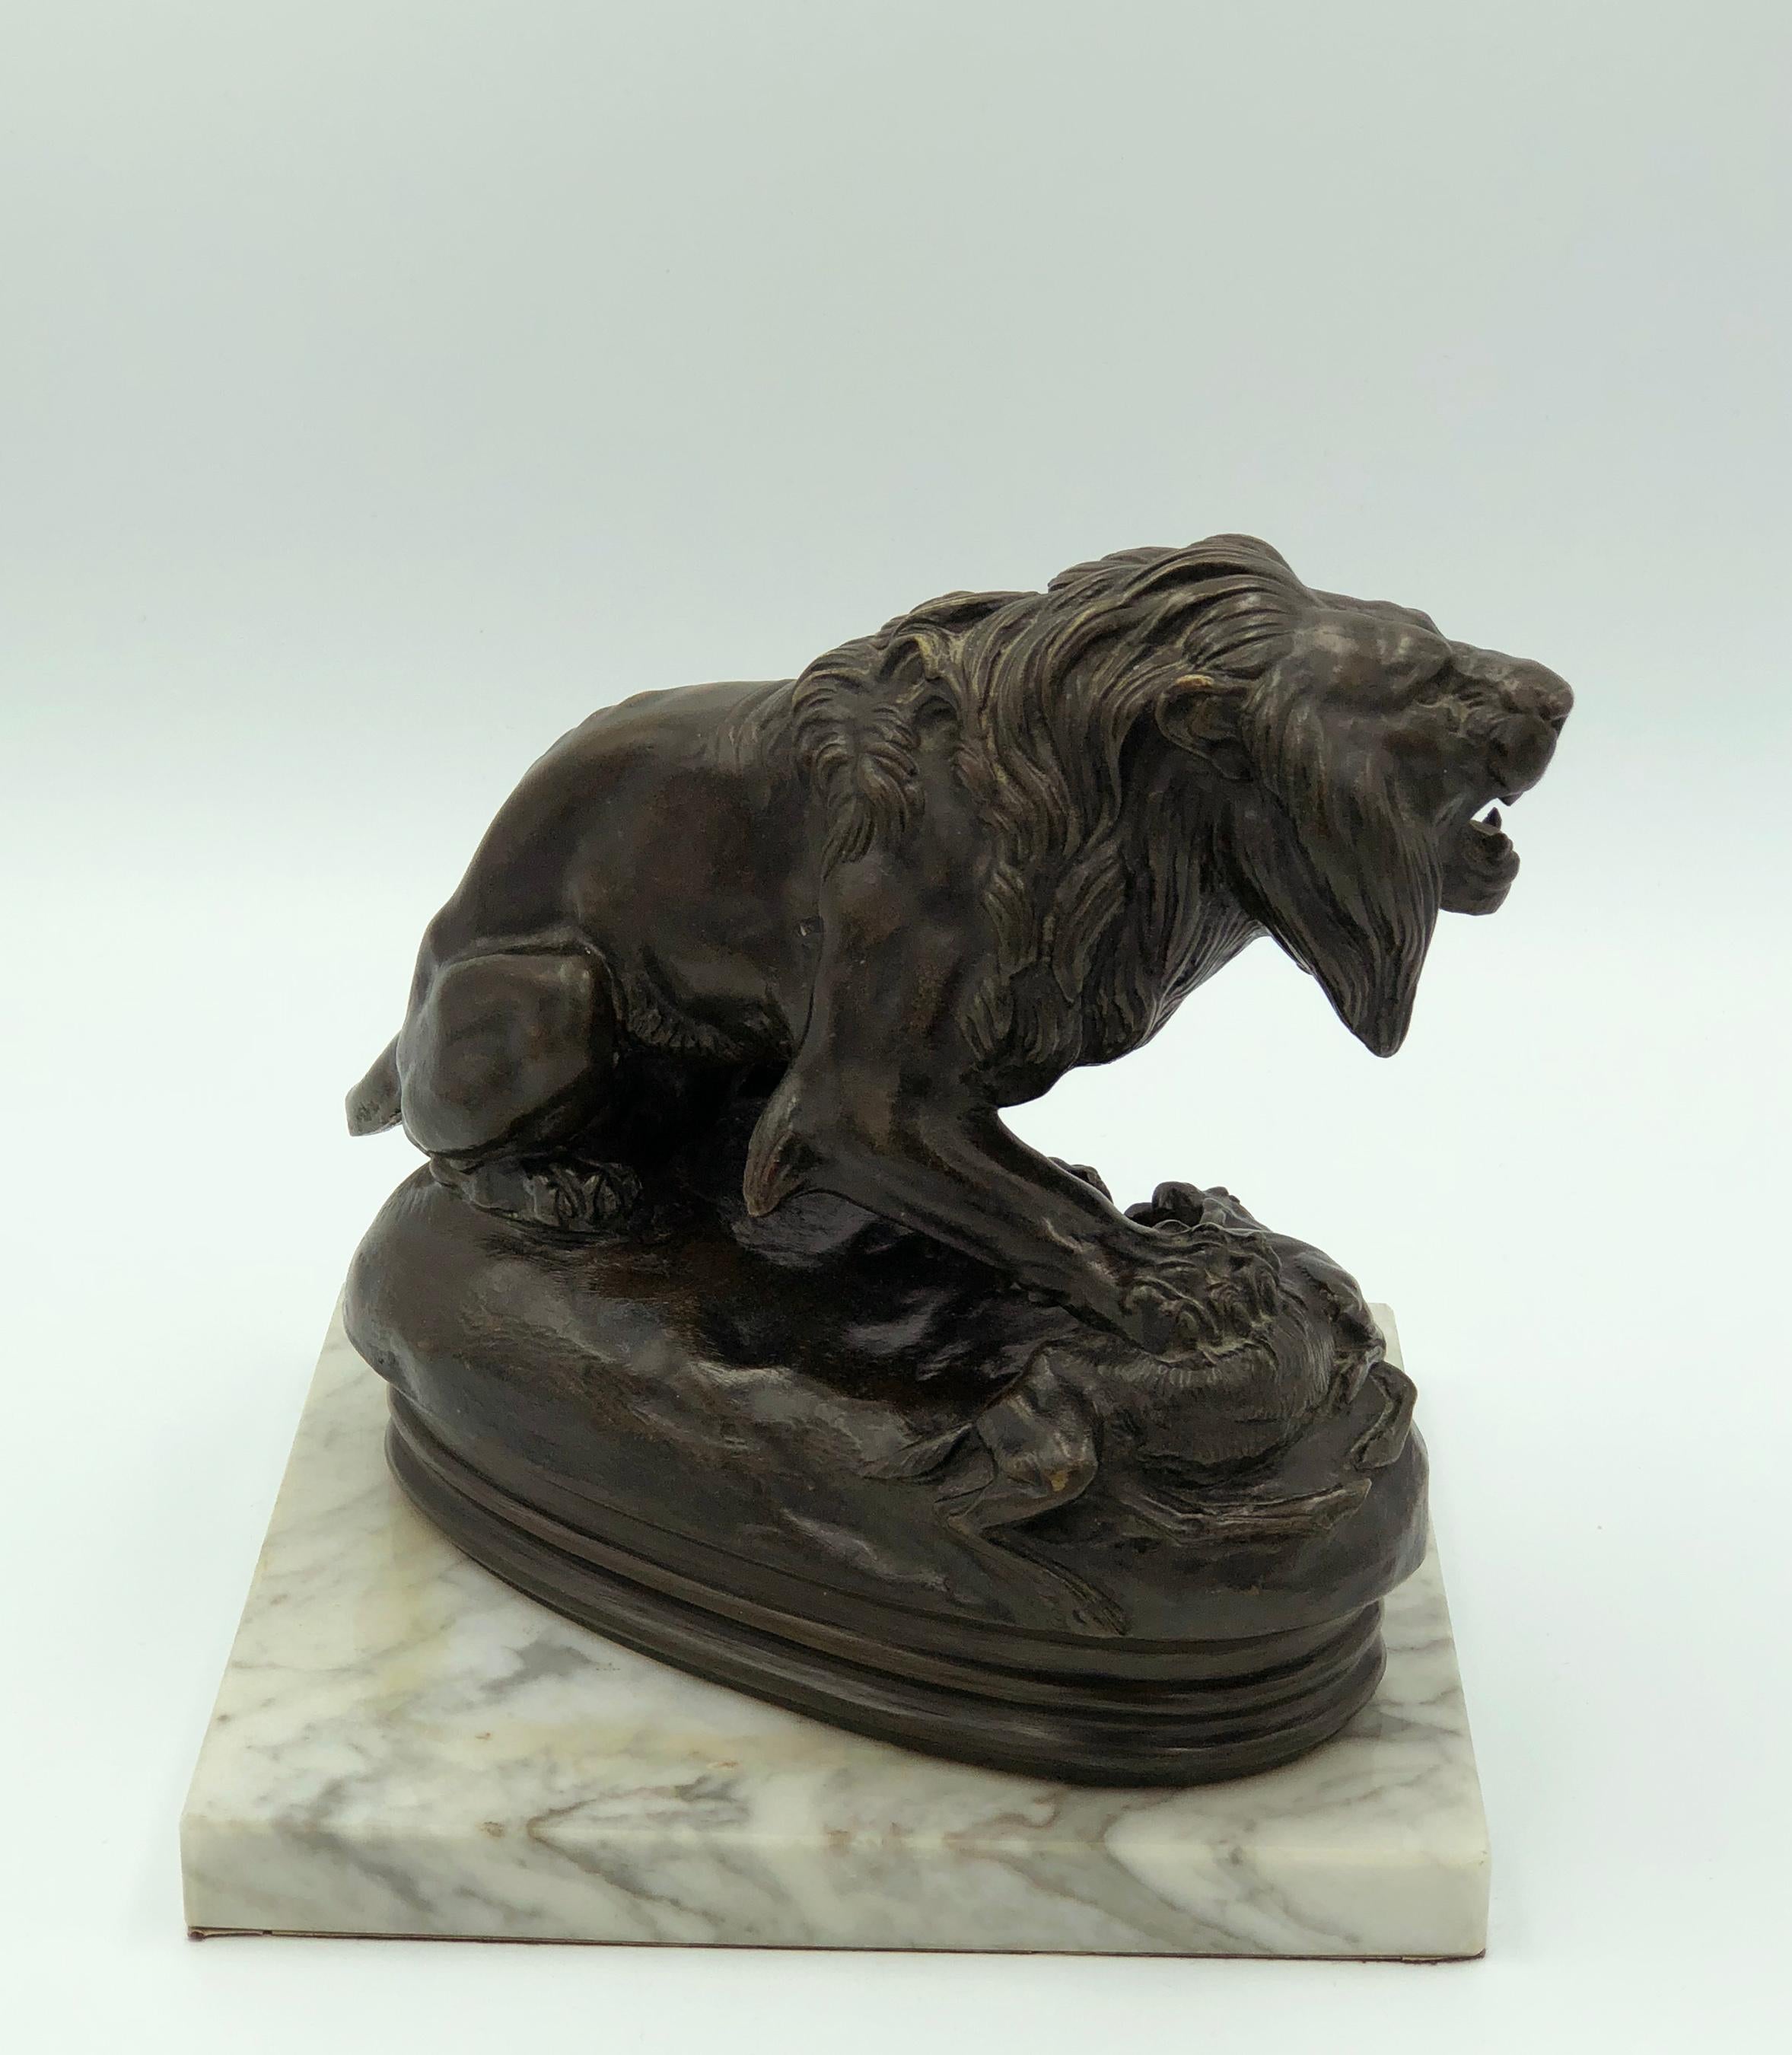 Lion and Antelope (No. 23) - Realist Sculpture by Antoine-Louis Barye